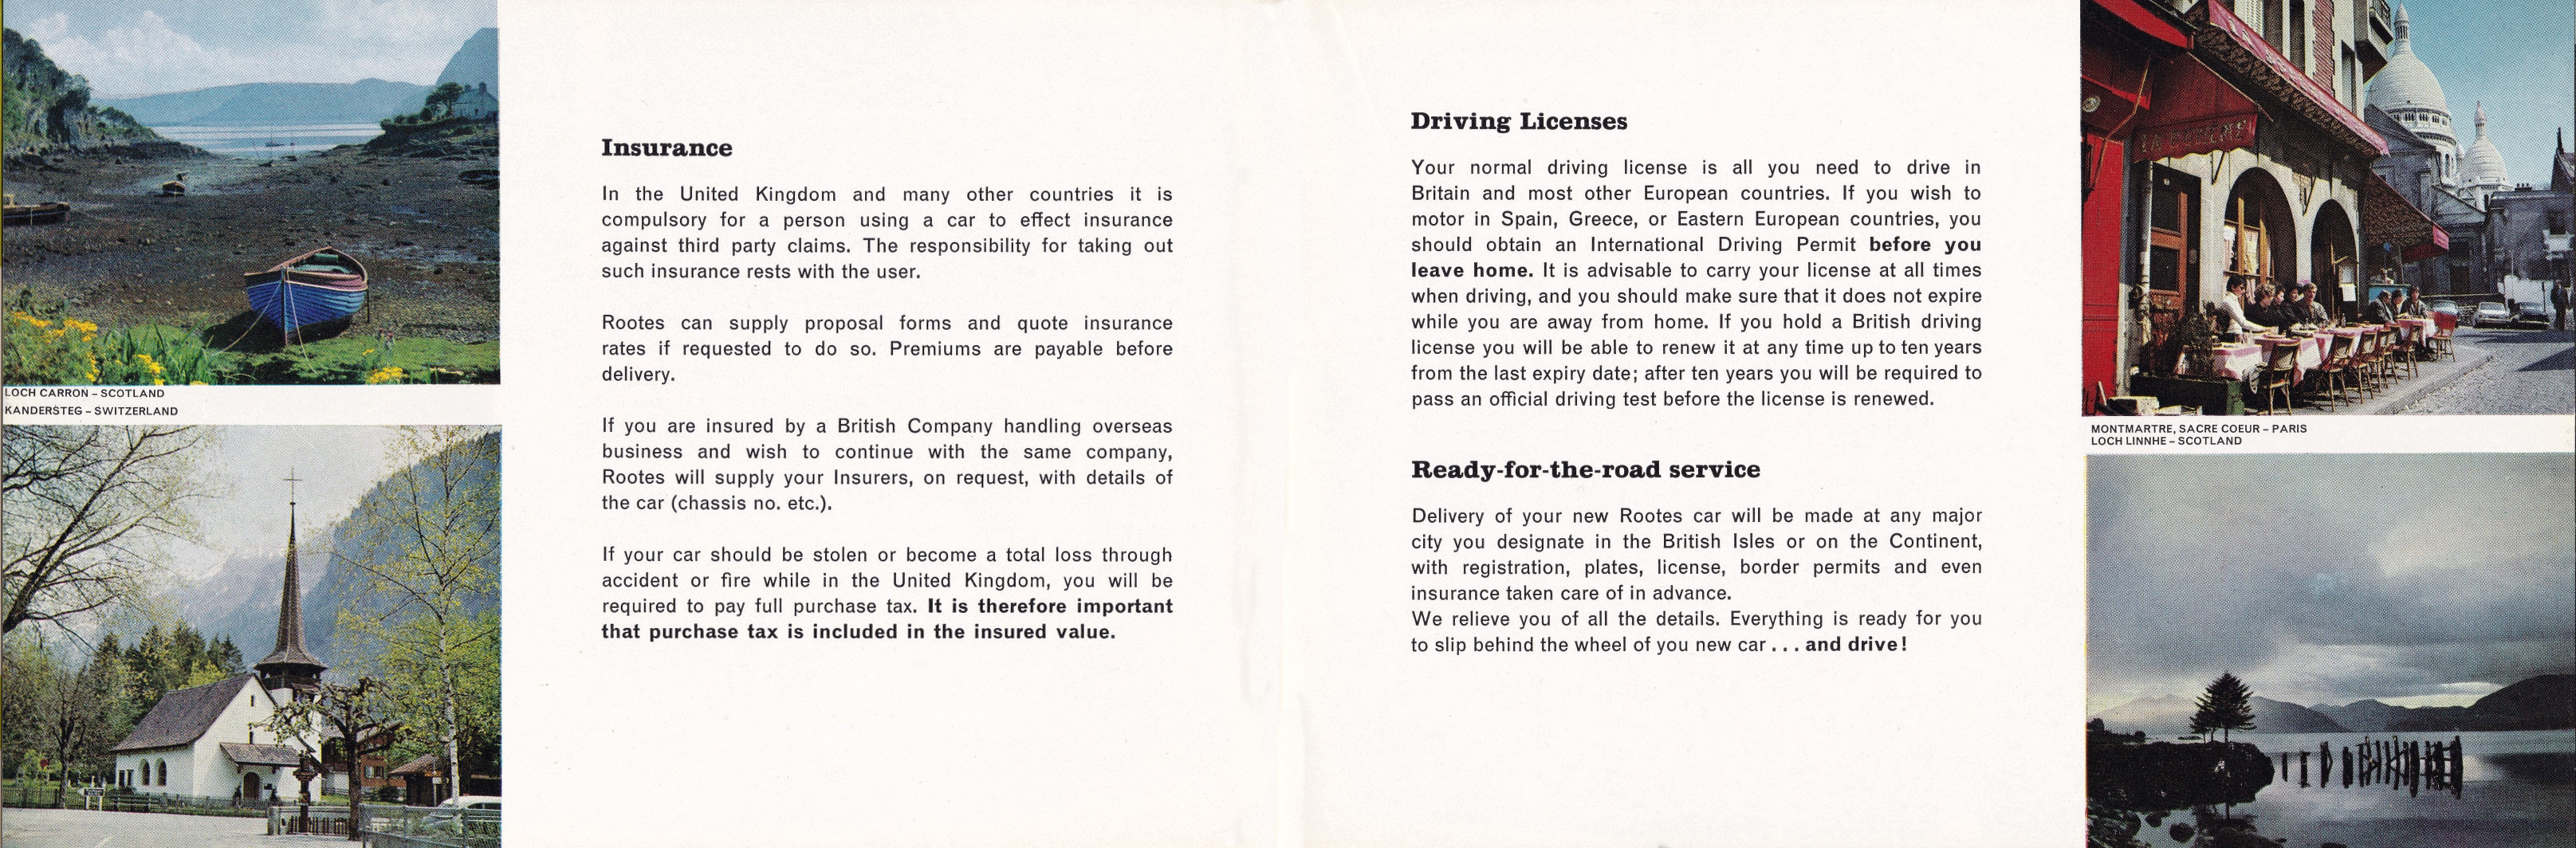 1966_Rootes_Overseas_Delivery-06-07